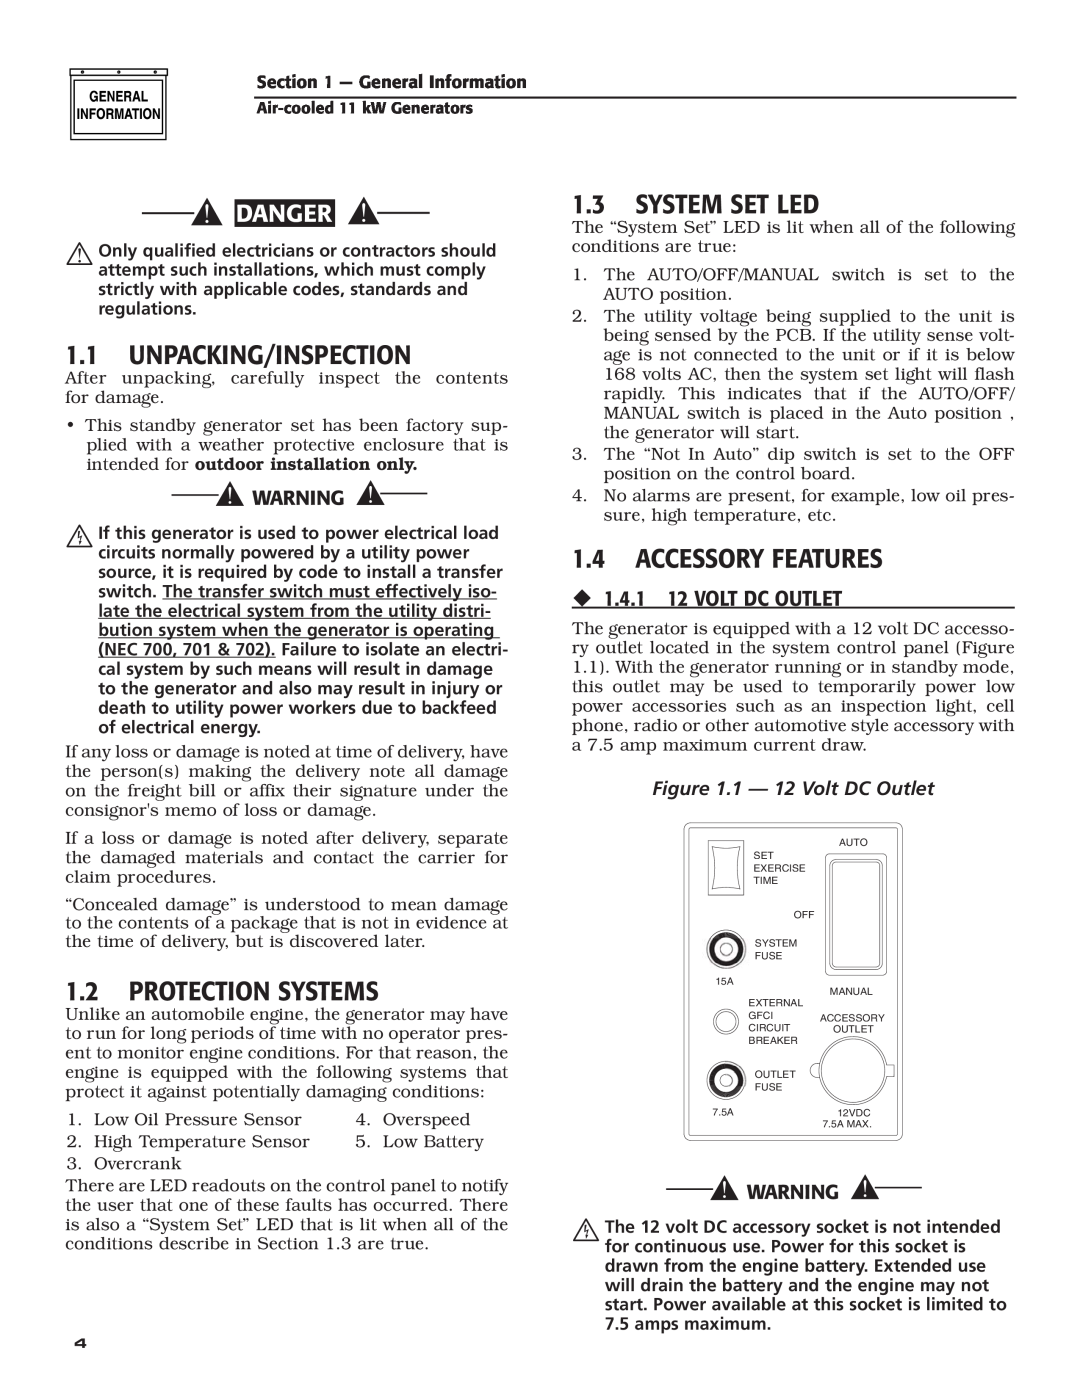 Generac Power Systems 004916-0 Unpacking/Inspection, Protection Systems, System Set Led, Accessory Features, Danger 